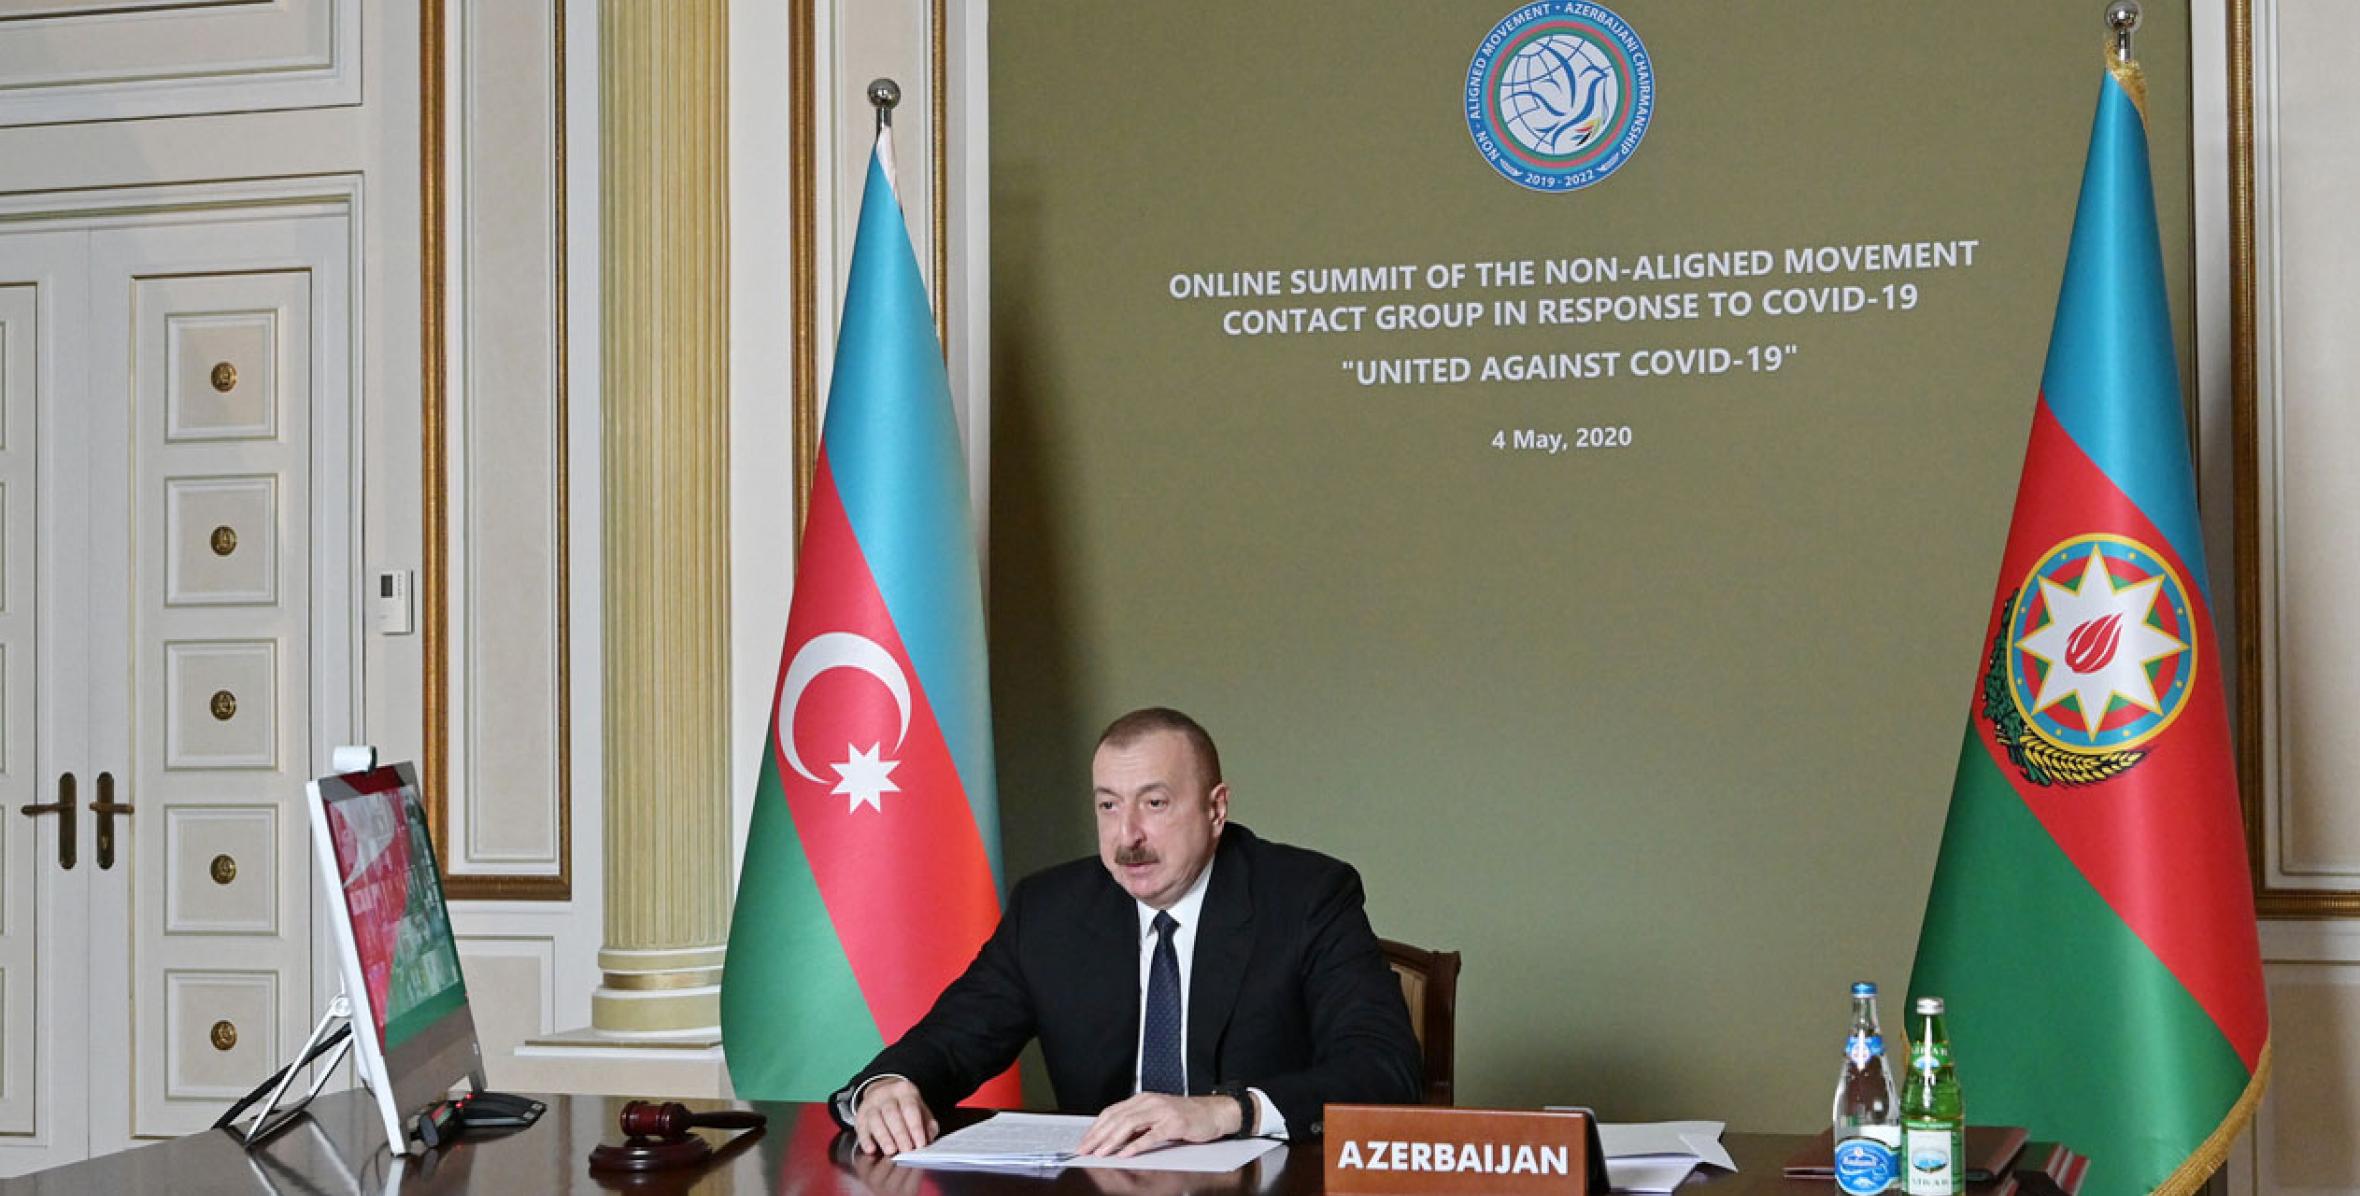 Speech by Ilham Aliyev at the Non-Aligned Movement Summit in the format of Contact Group